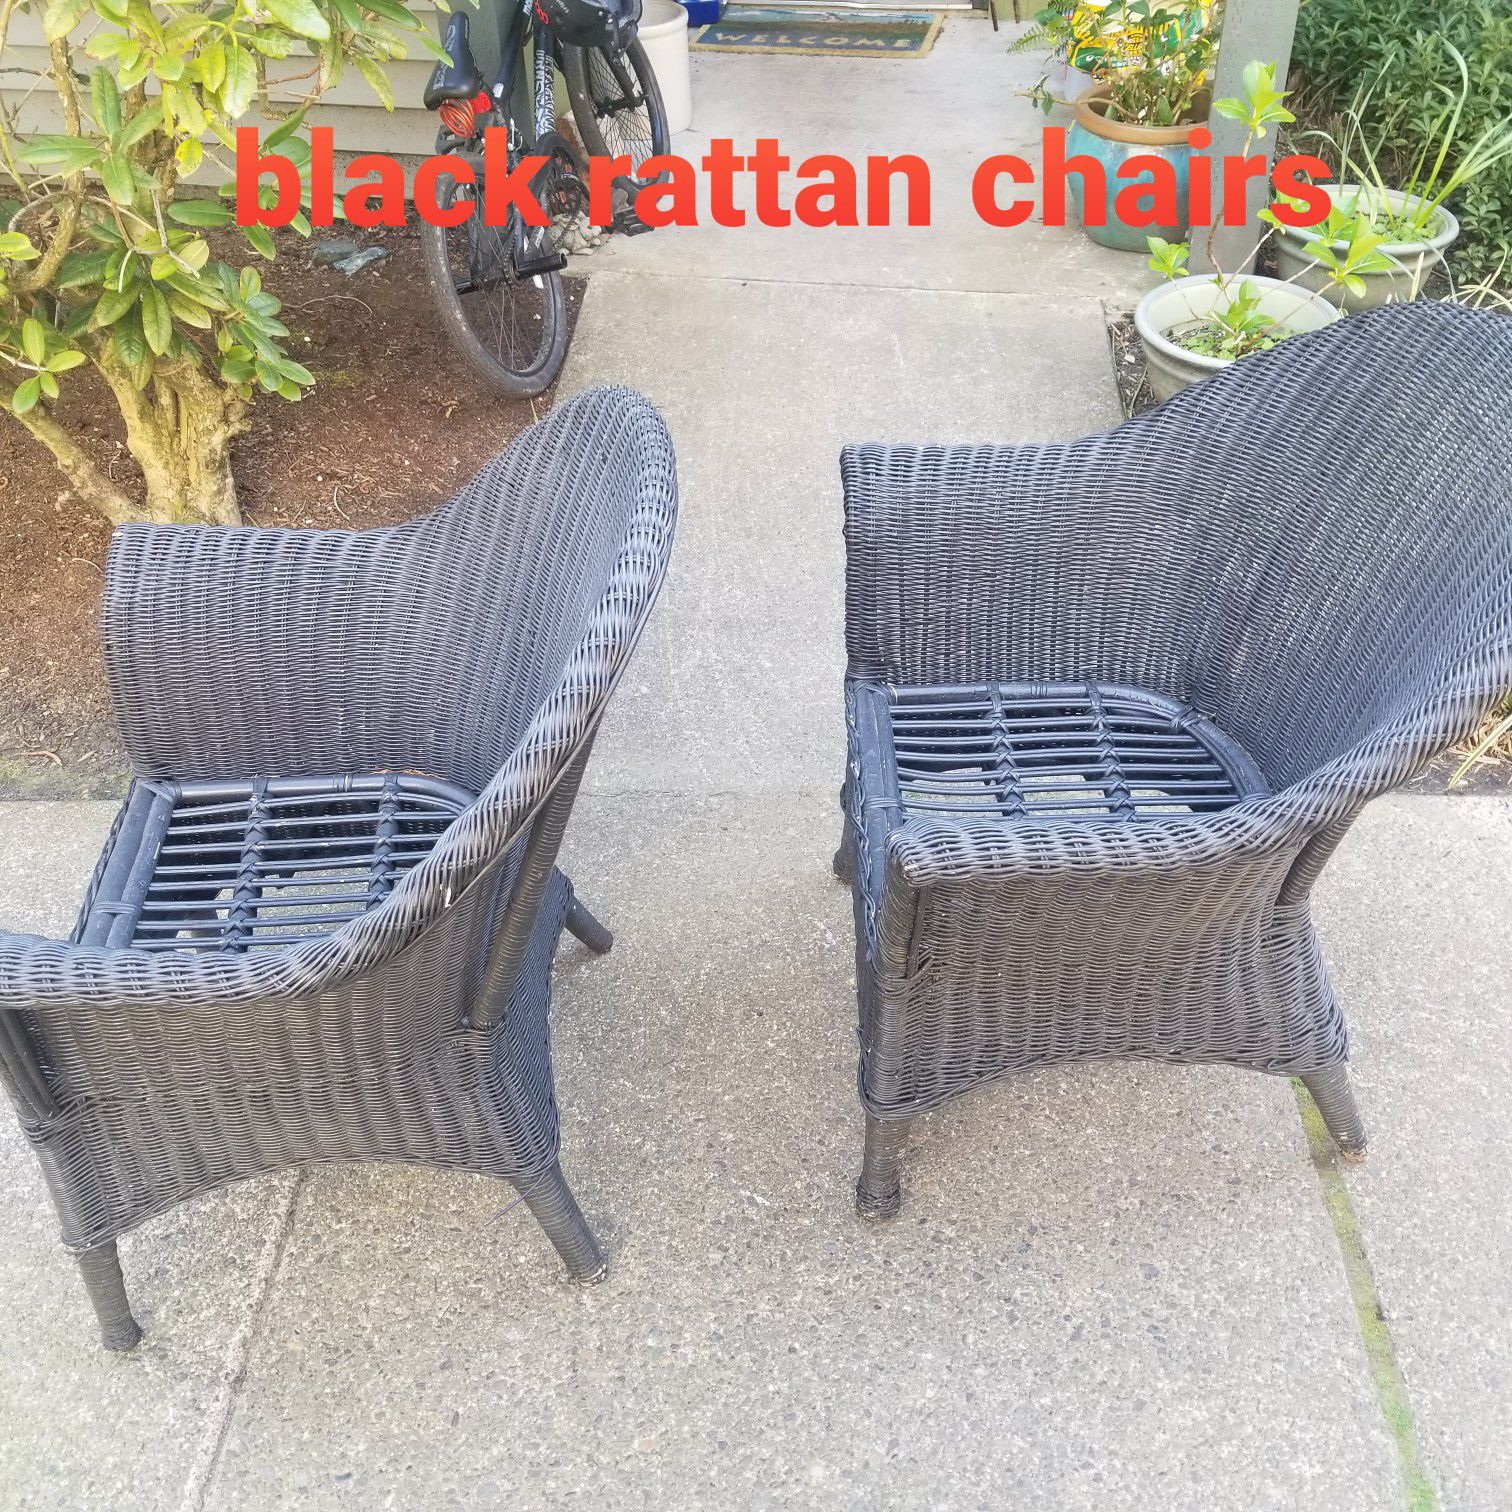 Black Rattan Chairs sold as pair